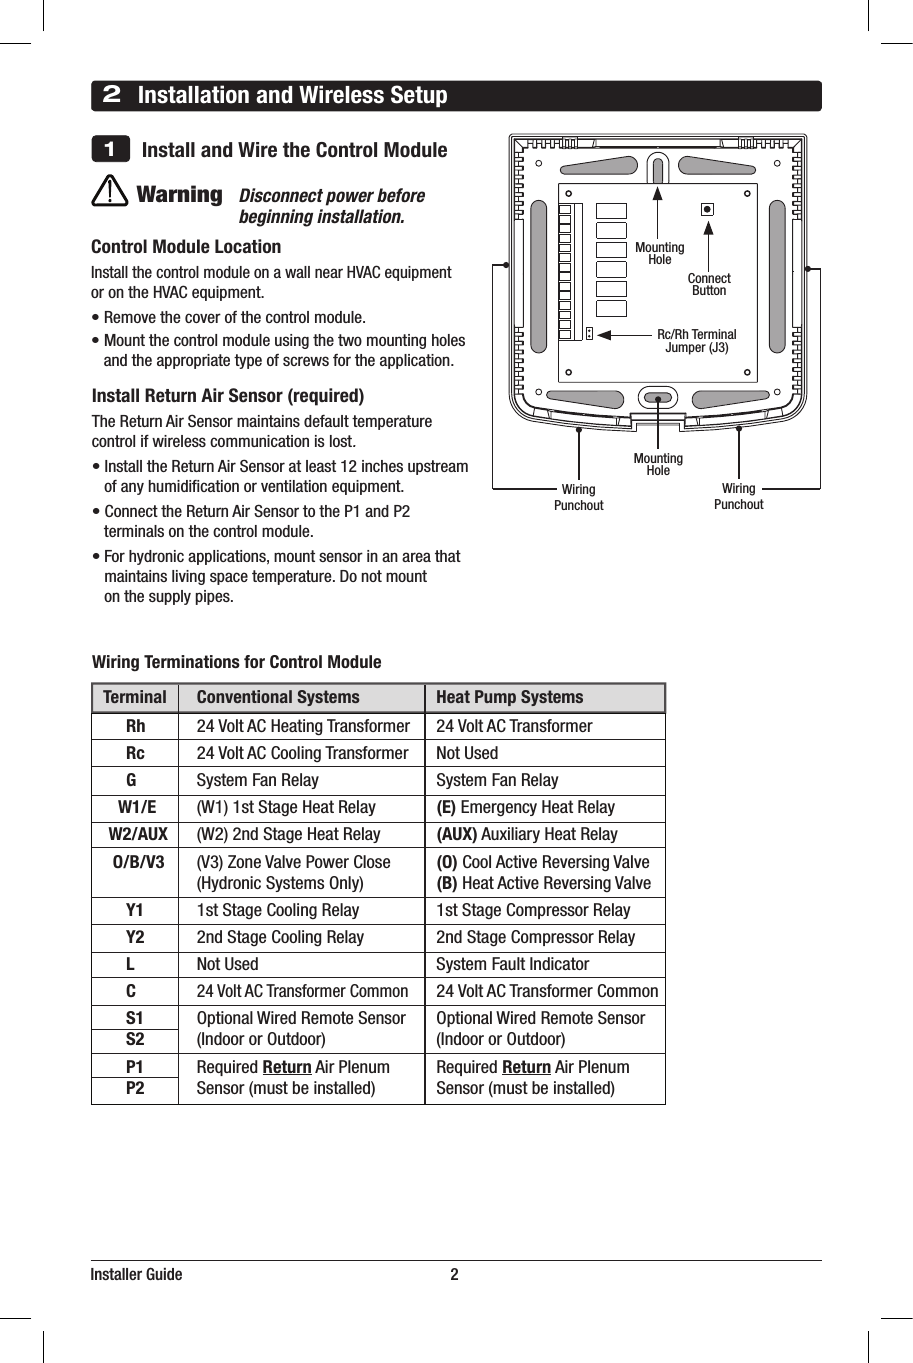 Installer Guide                                                                   22Installation and Wireless Setup    Install and Wire the Control Module1Wiring Terminations for Control Module  Terminal  Conventional Systems  Heat Pump Systems  Rh 24VoltACHeatingTransformer 24VoltACTransformer  Rc 24VoltACCoolingTransformer NotUsed  G SystemFanRelay SystemFanRelay  W1/E (W1)1stStageHeatRelay (E)EmergencyHeatRelay    W2/AUX (W2)2ndStageHeatRelay (AUX)AuxiliaryHeatRelay     O/B/V3 (V3)ZoneValvePowerClose (O)CoolActiveReversingValve   (HydronicSystemsOnly) (B)HeatActiveReversingValve  Y1 1stStageCoolingRelay 1stStageCompressorRelay  Y2 2ndStageCoolingRelay 2ndStageCompressorRelay  L NotUsed  SystemFaultIndicator  C 24VoltACTransformerCommon 24VoltACTransformerCommon  S1 OptionalWiredRemoteSensor OptionalWiredRemoteSensor  S2 (IndoororOutdoor) (IndoororOutdoor)  P1 RequiredReturnAirPlenum RequiredReturnAirPlenum  P2 Sensor(mustbeinstalled) Sensor(mustbeinstalled)WarningDisconnect power before beginning installation.Control Module LocationInstallthecontrolmoduleonawallnearHVACequipment orontheHVACequipment.•Removethecoverofthecontrolmodule.•Mountthecontrolmoduleusingthetwomountingholesandtheappropriatetypeofscrewsfortheapplication.Install Return Air Sensor (required)TheReturnAirSensormaintainsdefaulttemperaturecontrolifwirelesscommunicationislost.•InstalltheReturnAirSensoratleast12inchesupstream ofanyhumidicationorventilationequipment.•ConnecttheReturnAirSensortotheP1andP2  terminals on the control module.•Forhydronicapplications,mountsensorinanareathat maintainslivingspacetemperature.Donotmount onthesupplypipes. WiringPunchoutMountingHoleMountingHoleWiringPunchout  Heat Only  Set System Type to 11CONV Rh 24VoltACPower(heatingtransformer)[note 1] W1 HeatRelay G FanRelay[note 3] C 24VoltACTransformerCommon 1 HEAT / 1 COOL Single or Dual Transformer   Set System Type to 11CONV Rh 24VoltACPower(heatingtransformer)[note 1] Rc 24VoltACPower(coolingtransformer)[note 1] W1 HeatRelay Y1 CompressorRelay G FanRelay C 24VoltACTransformerCommon[note 2] 2 HEAT / 2 COOL Single or Dual transformer  Set System Type to 22CONV Rh 24VoltACPower(heatingtransformer)[note 1] Rc 24VoltACPower(coolingtransformer)[note 1] W1 HeatRelayStage1 W2 HeatRelayStage2 Y1 CompressorRelayStage1 Y2 CompressorRelayStage2 [note 3] G FanRelay C 24VoltACTransformerCommon[note 2]ConnectButton Rc/RhTerminalJumper (J3)